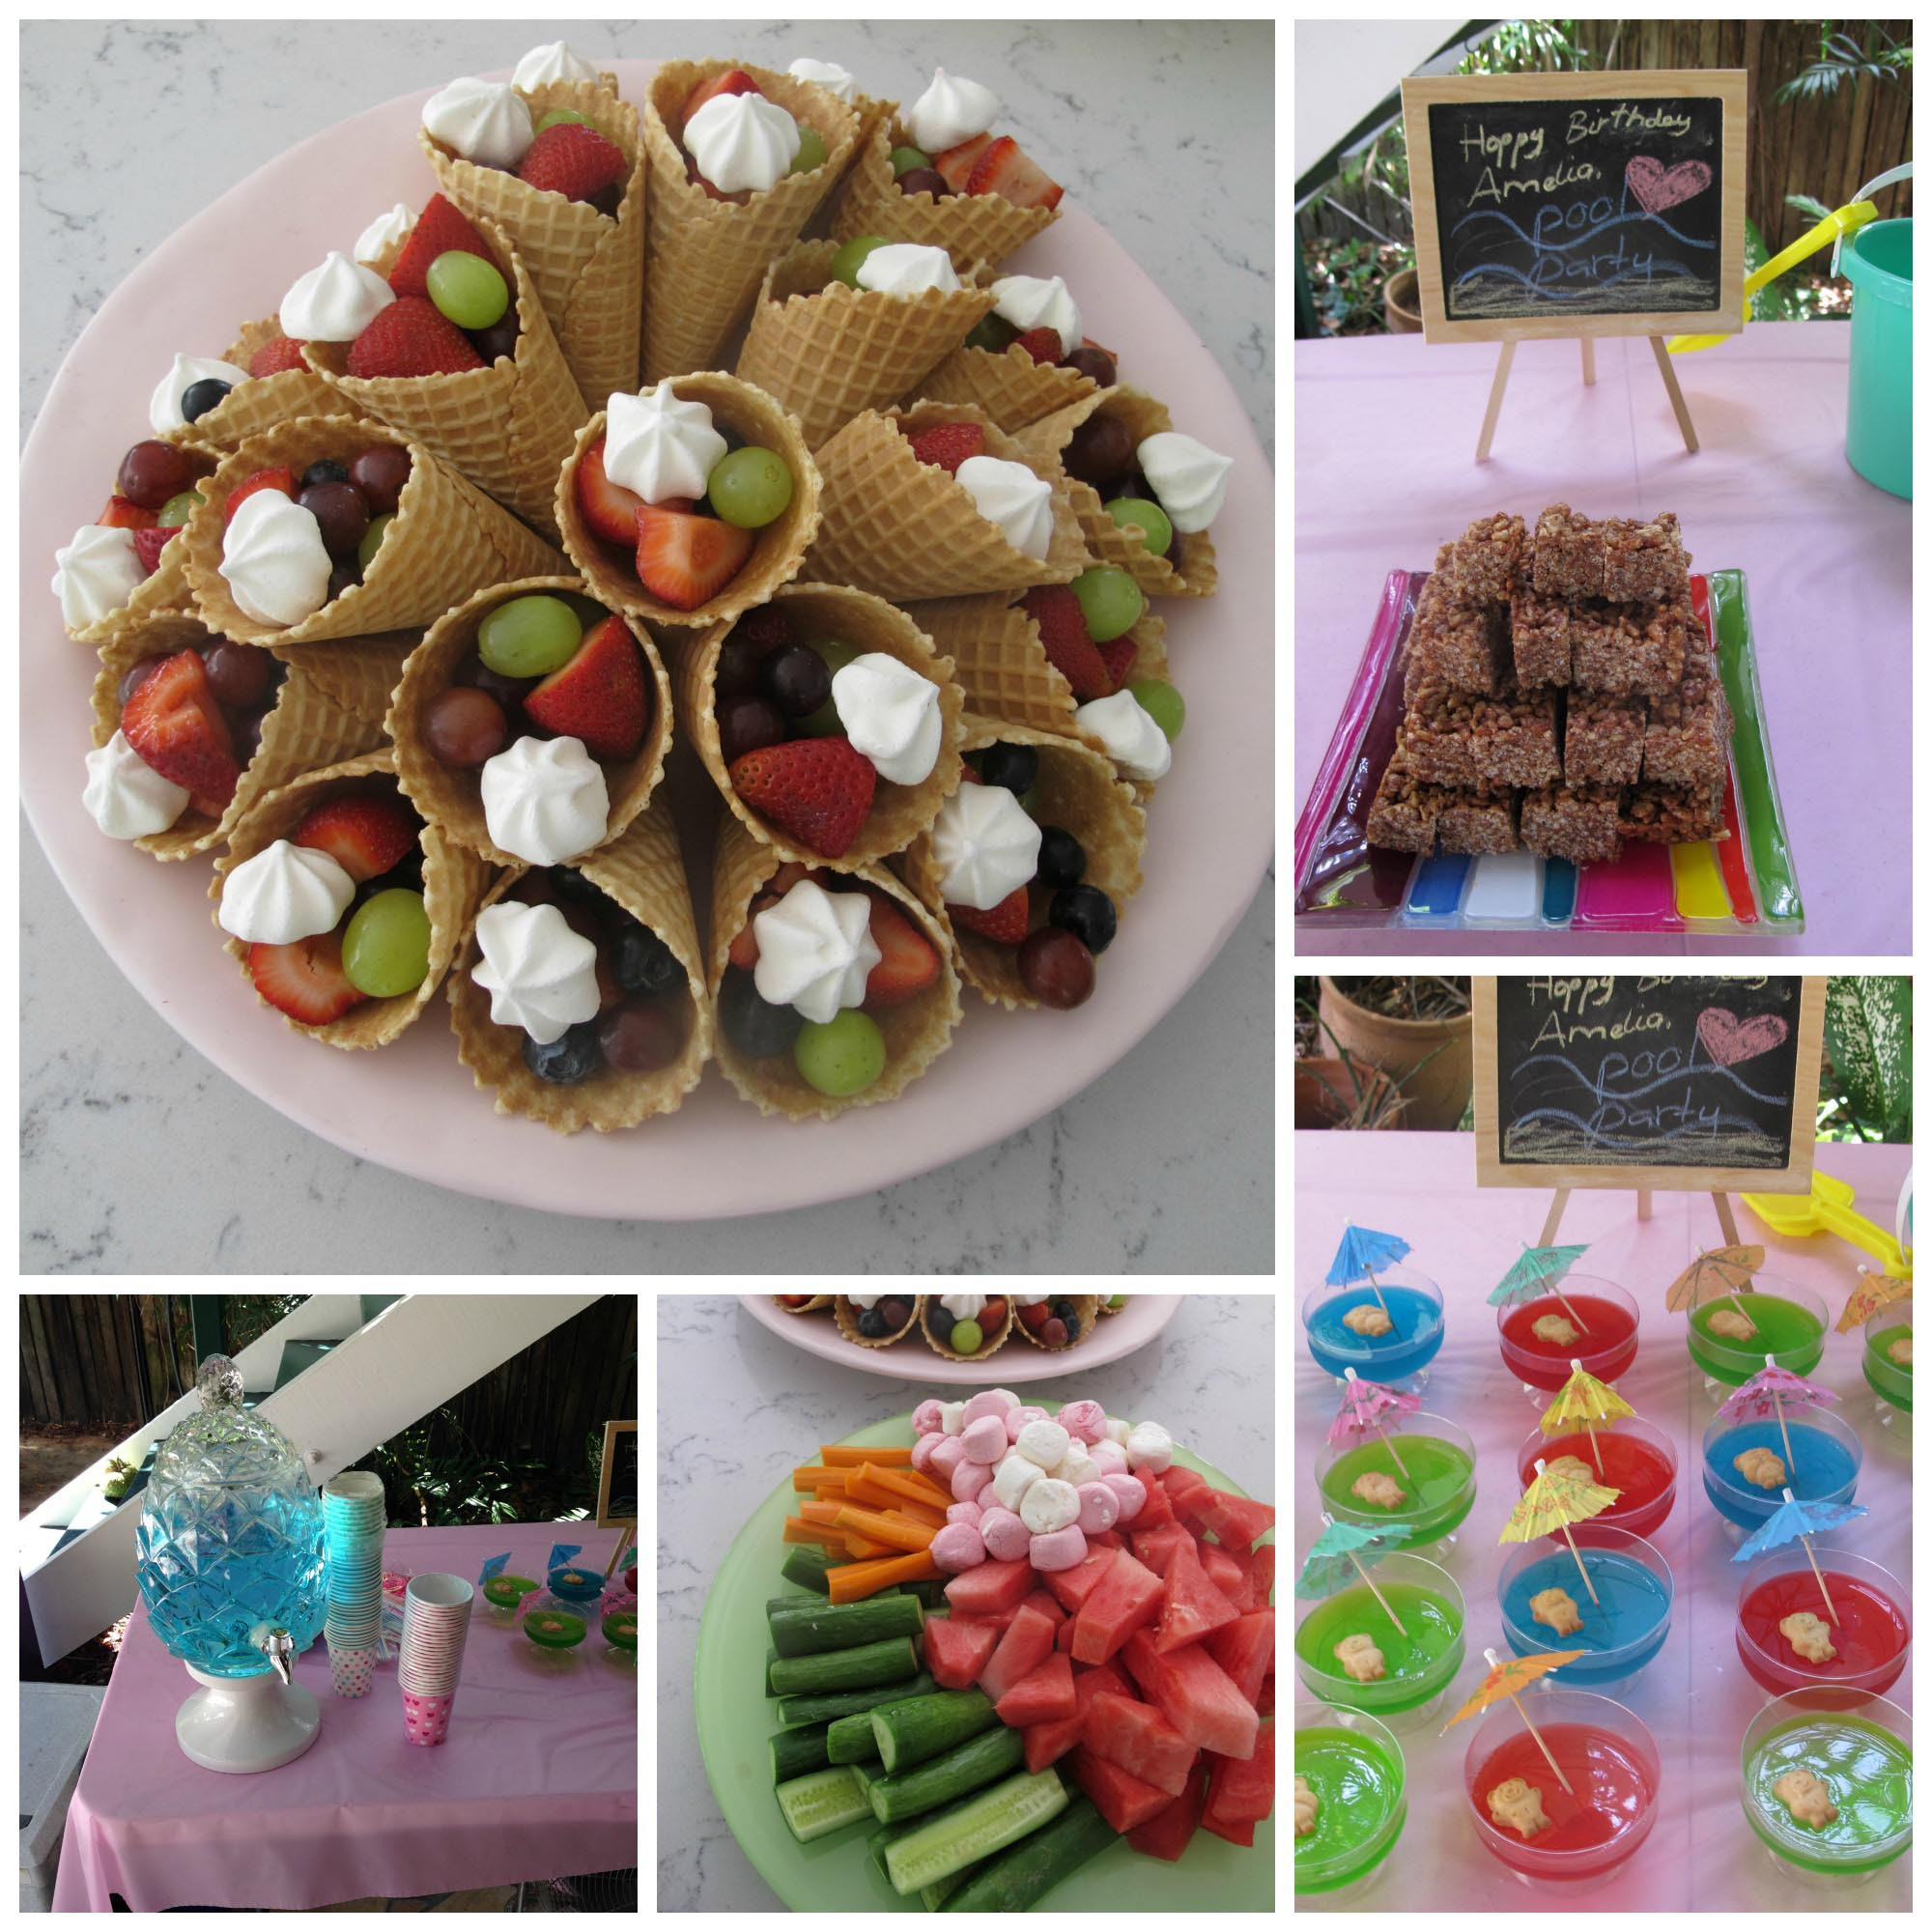 Pool Party Food Ideas
 The Perfect Kids Pool Party